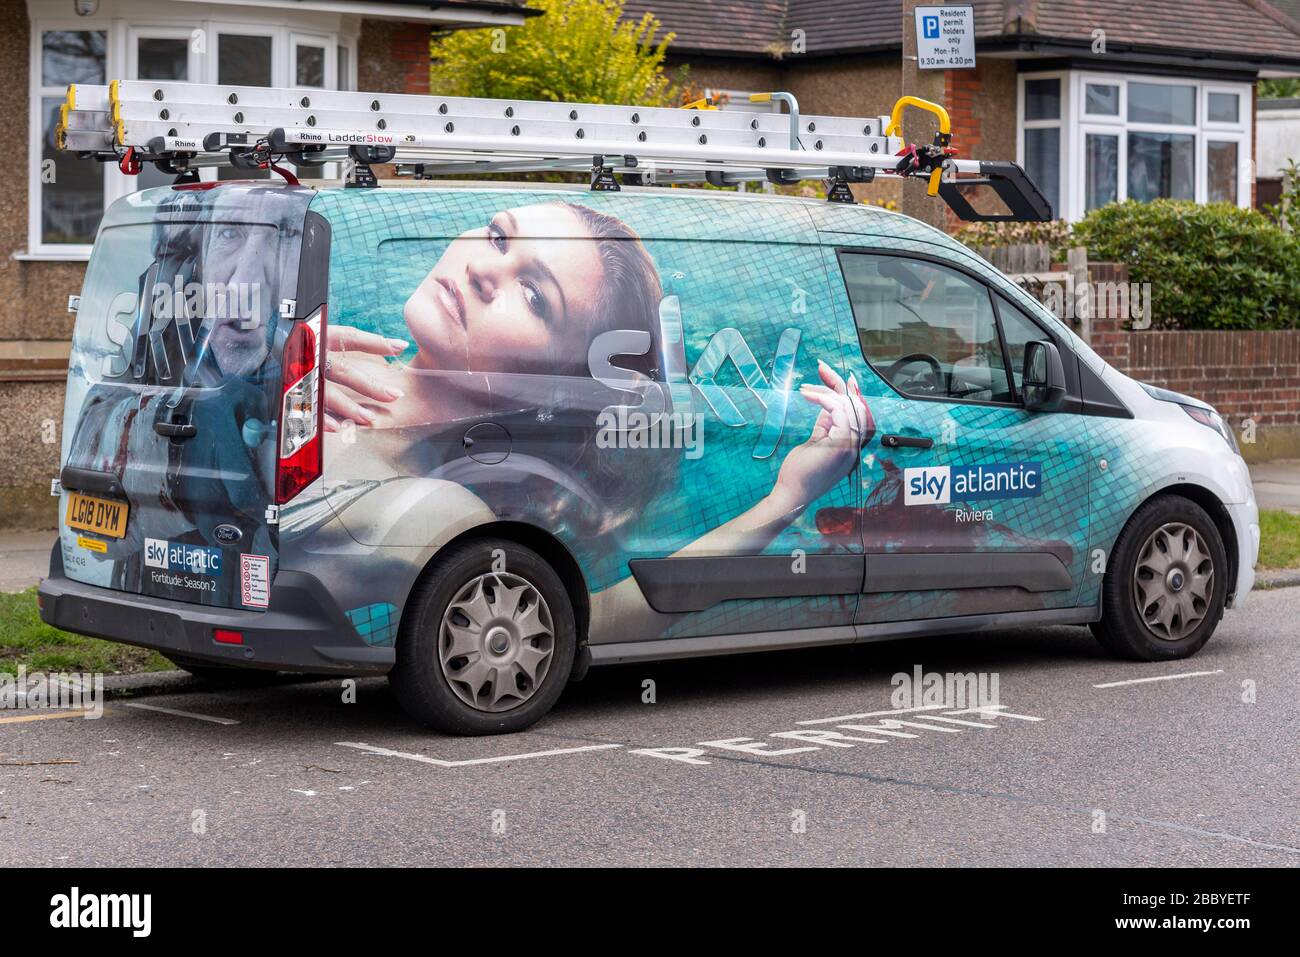 Sky Atlantic satellite television installation van with graphic wrap, with images from Riviera and Fortitude, season 2. During COVID-19 lockdown Stock Photo